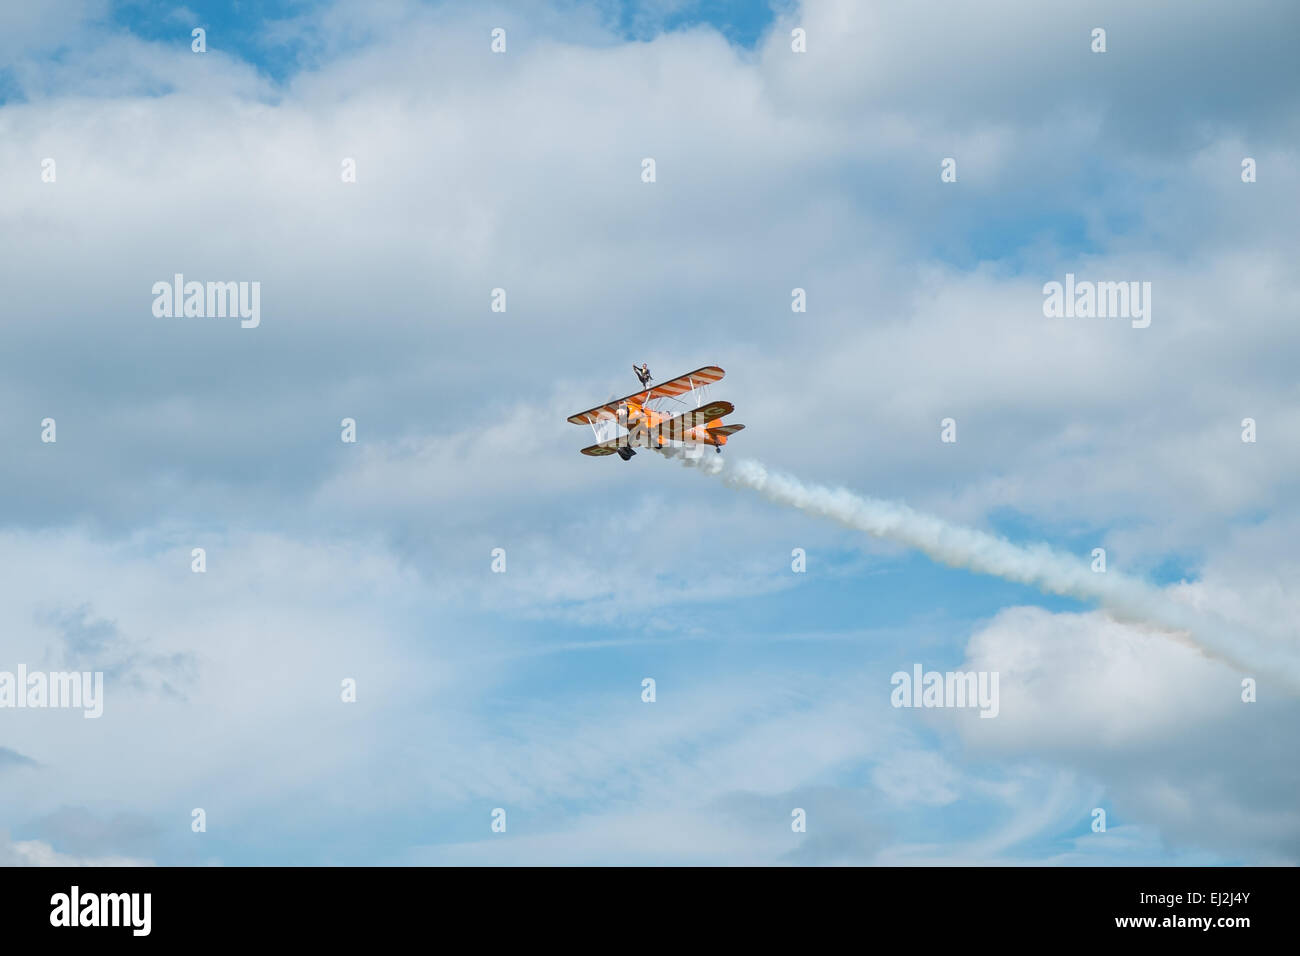 ASCOT, UK - AUGUST 16, 2014: Wing walking display at the Red Bull Air Race in Ascot, August 16, 2014. Stock Photo